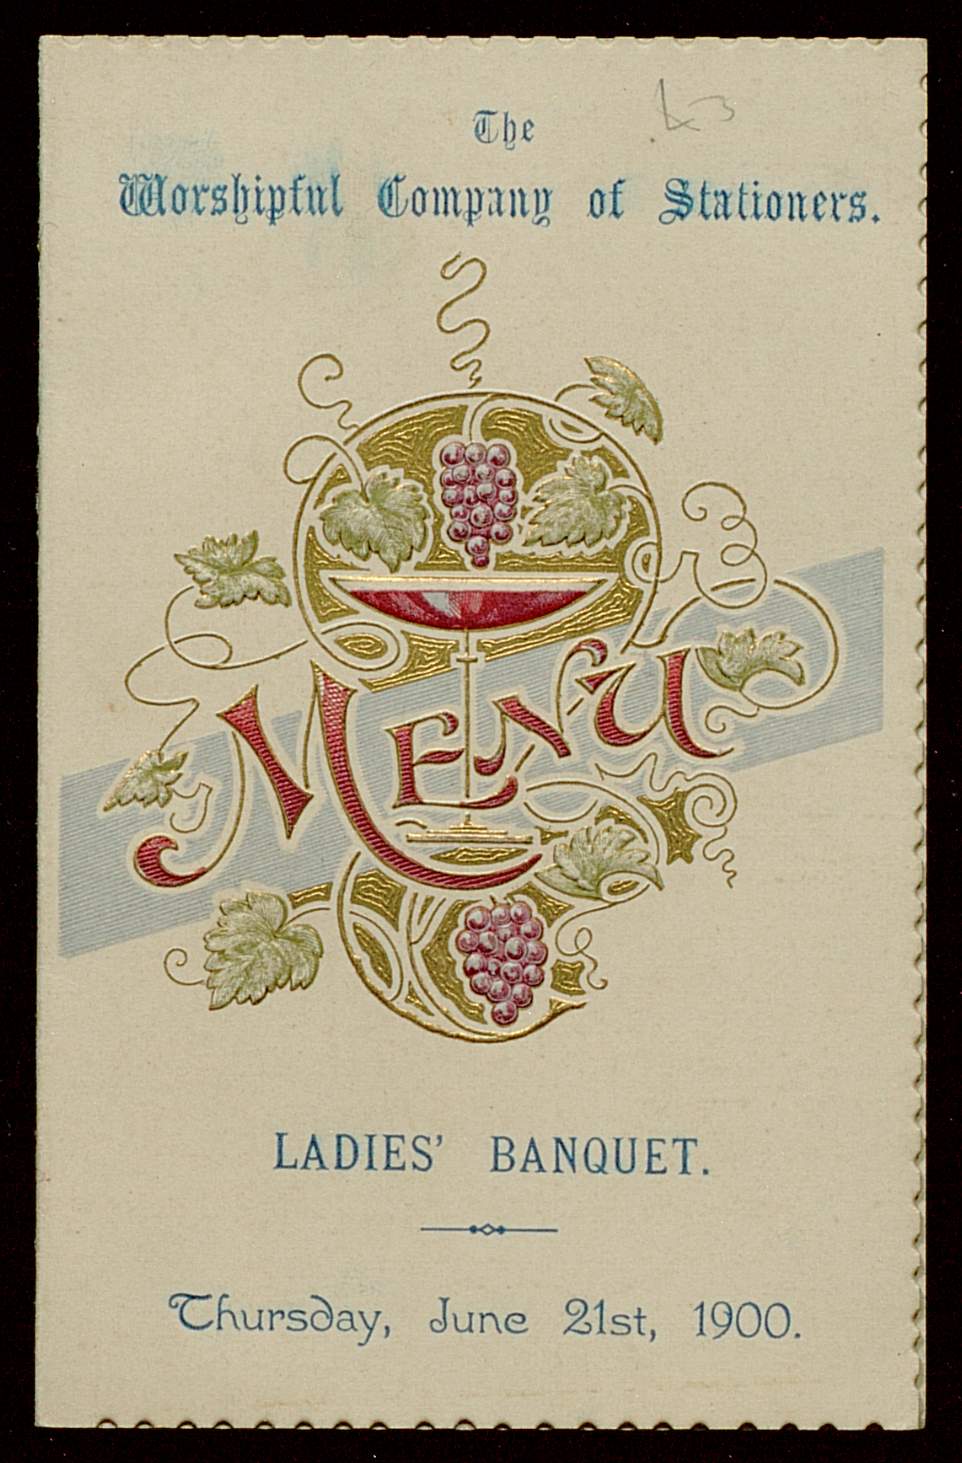 Front cover of a Menu from a Stationers' Company Ladies' Banquet.